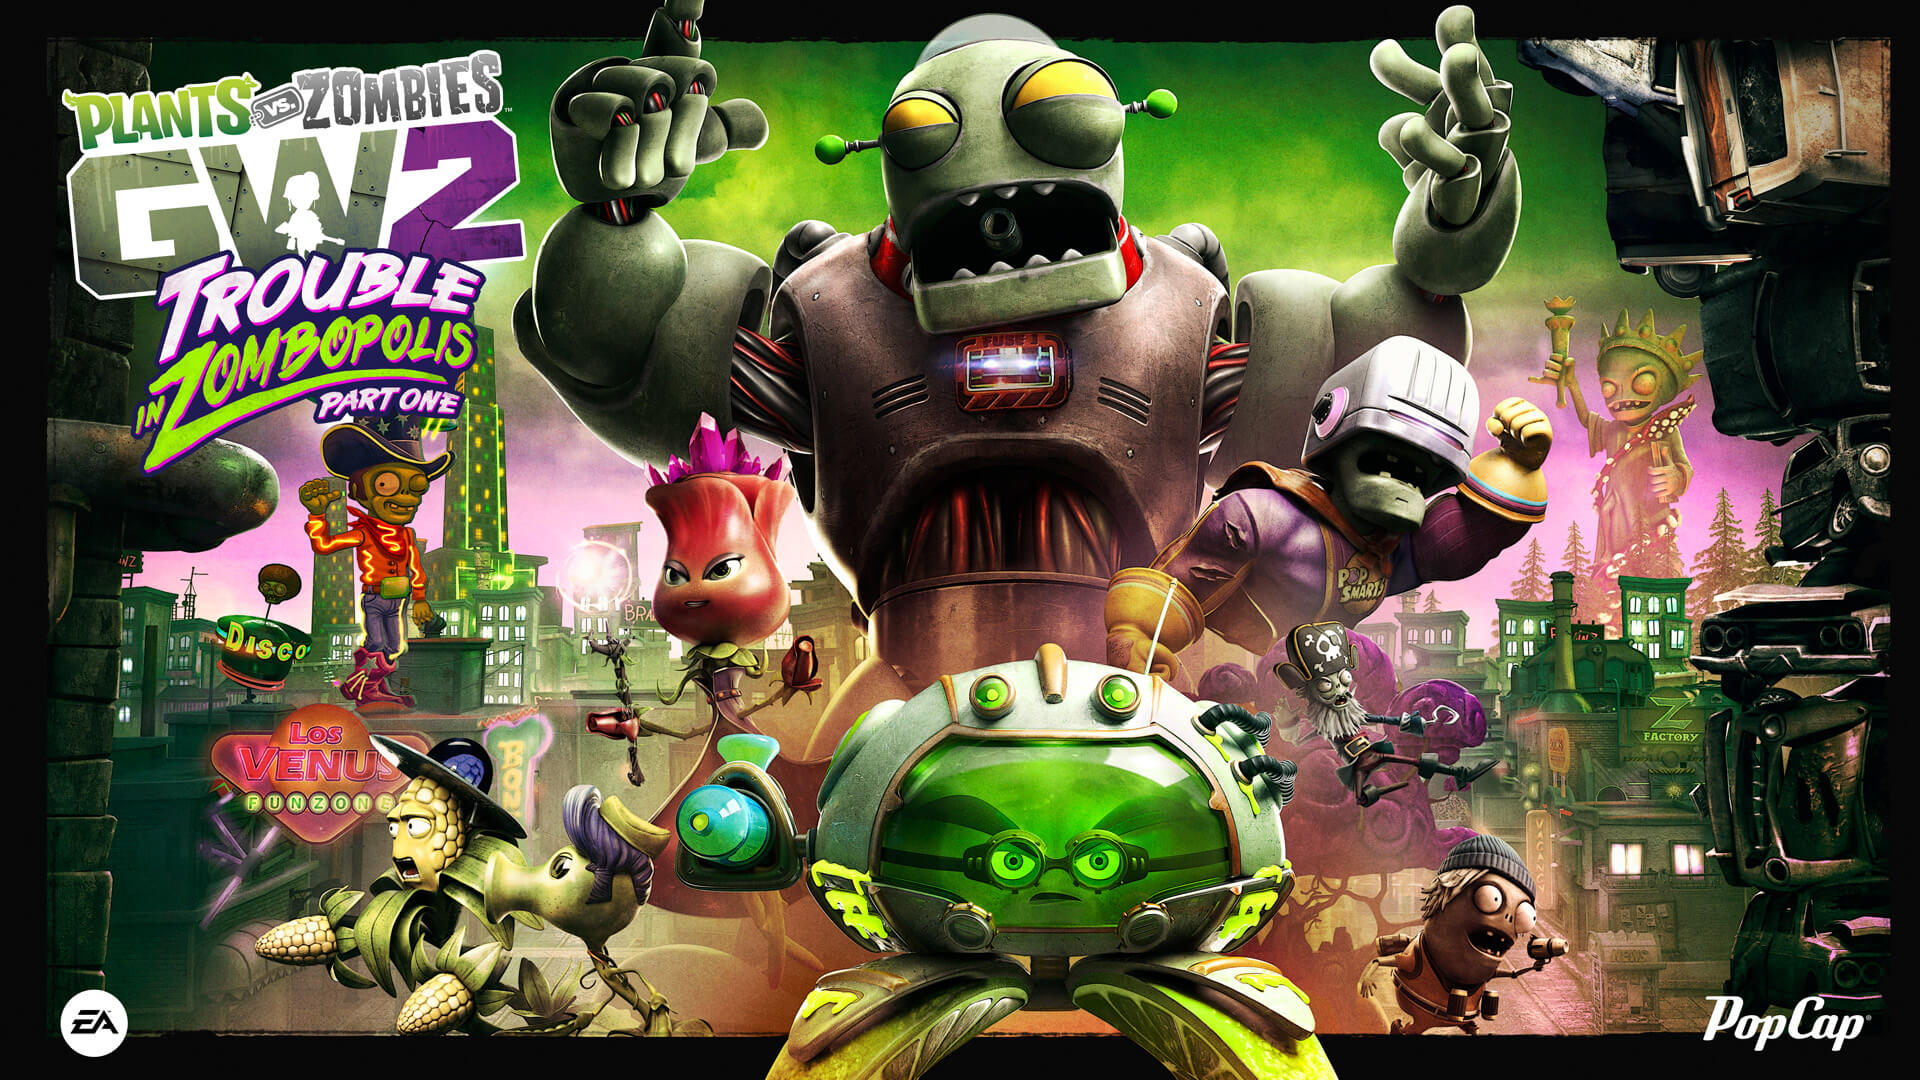 Download game plants vs zombies 2 for pc windows 7